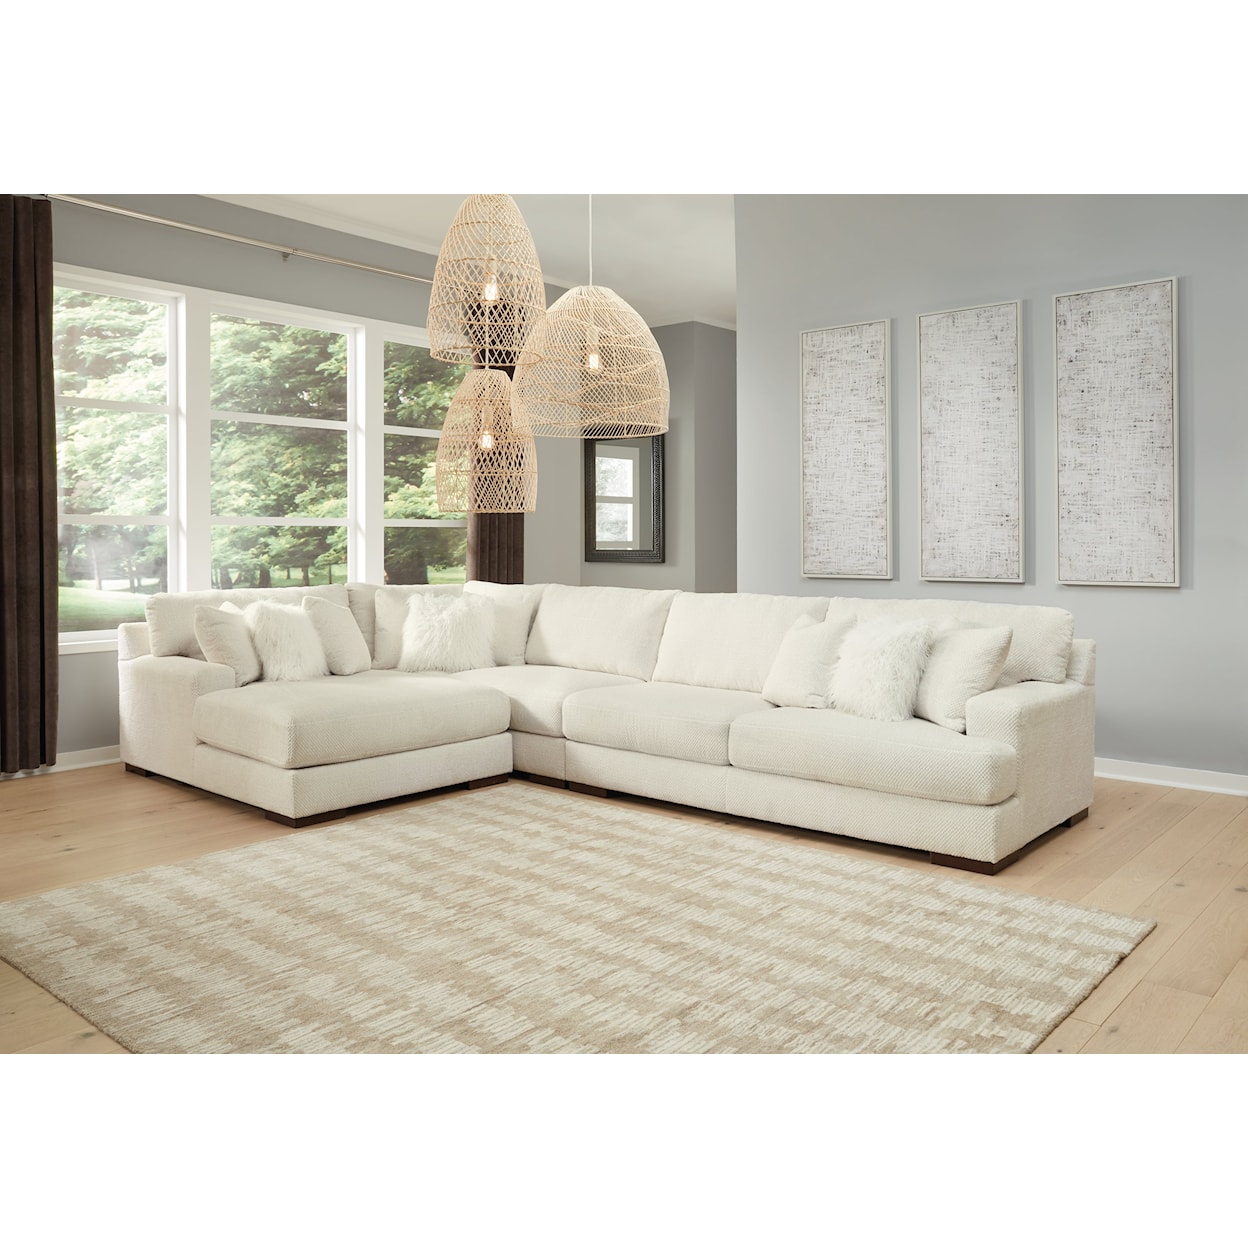 Michael Alan Select Zada 4-Piece Sectional with Chaise